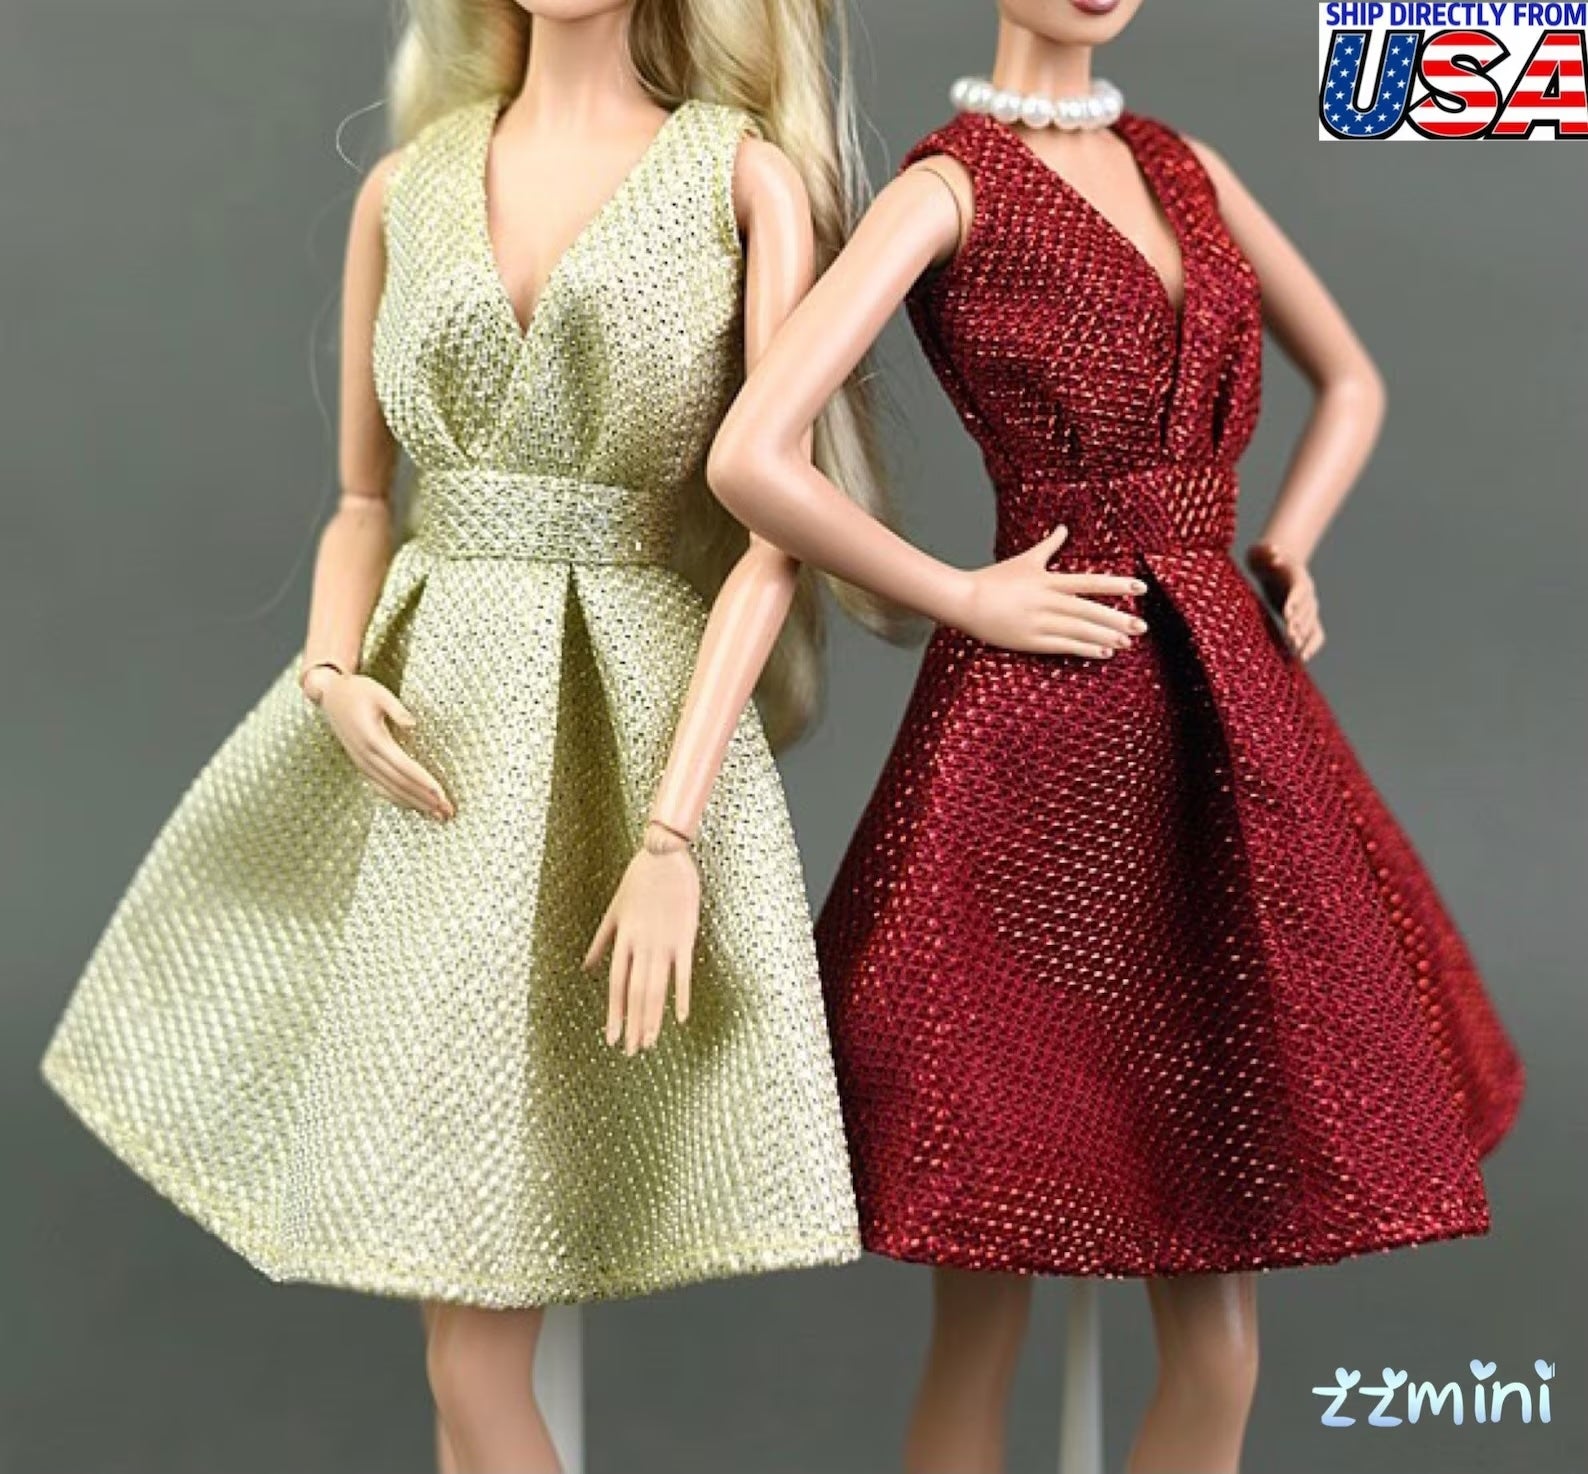 Fashion Doll Dress Classical Evening Dress Clothes for 11.5" Doll